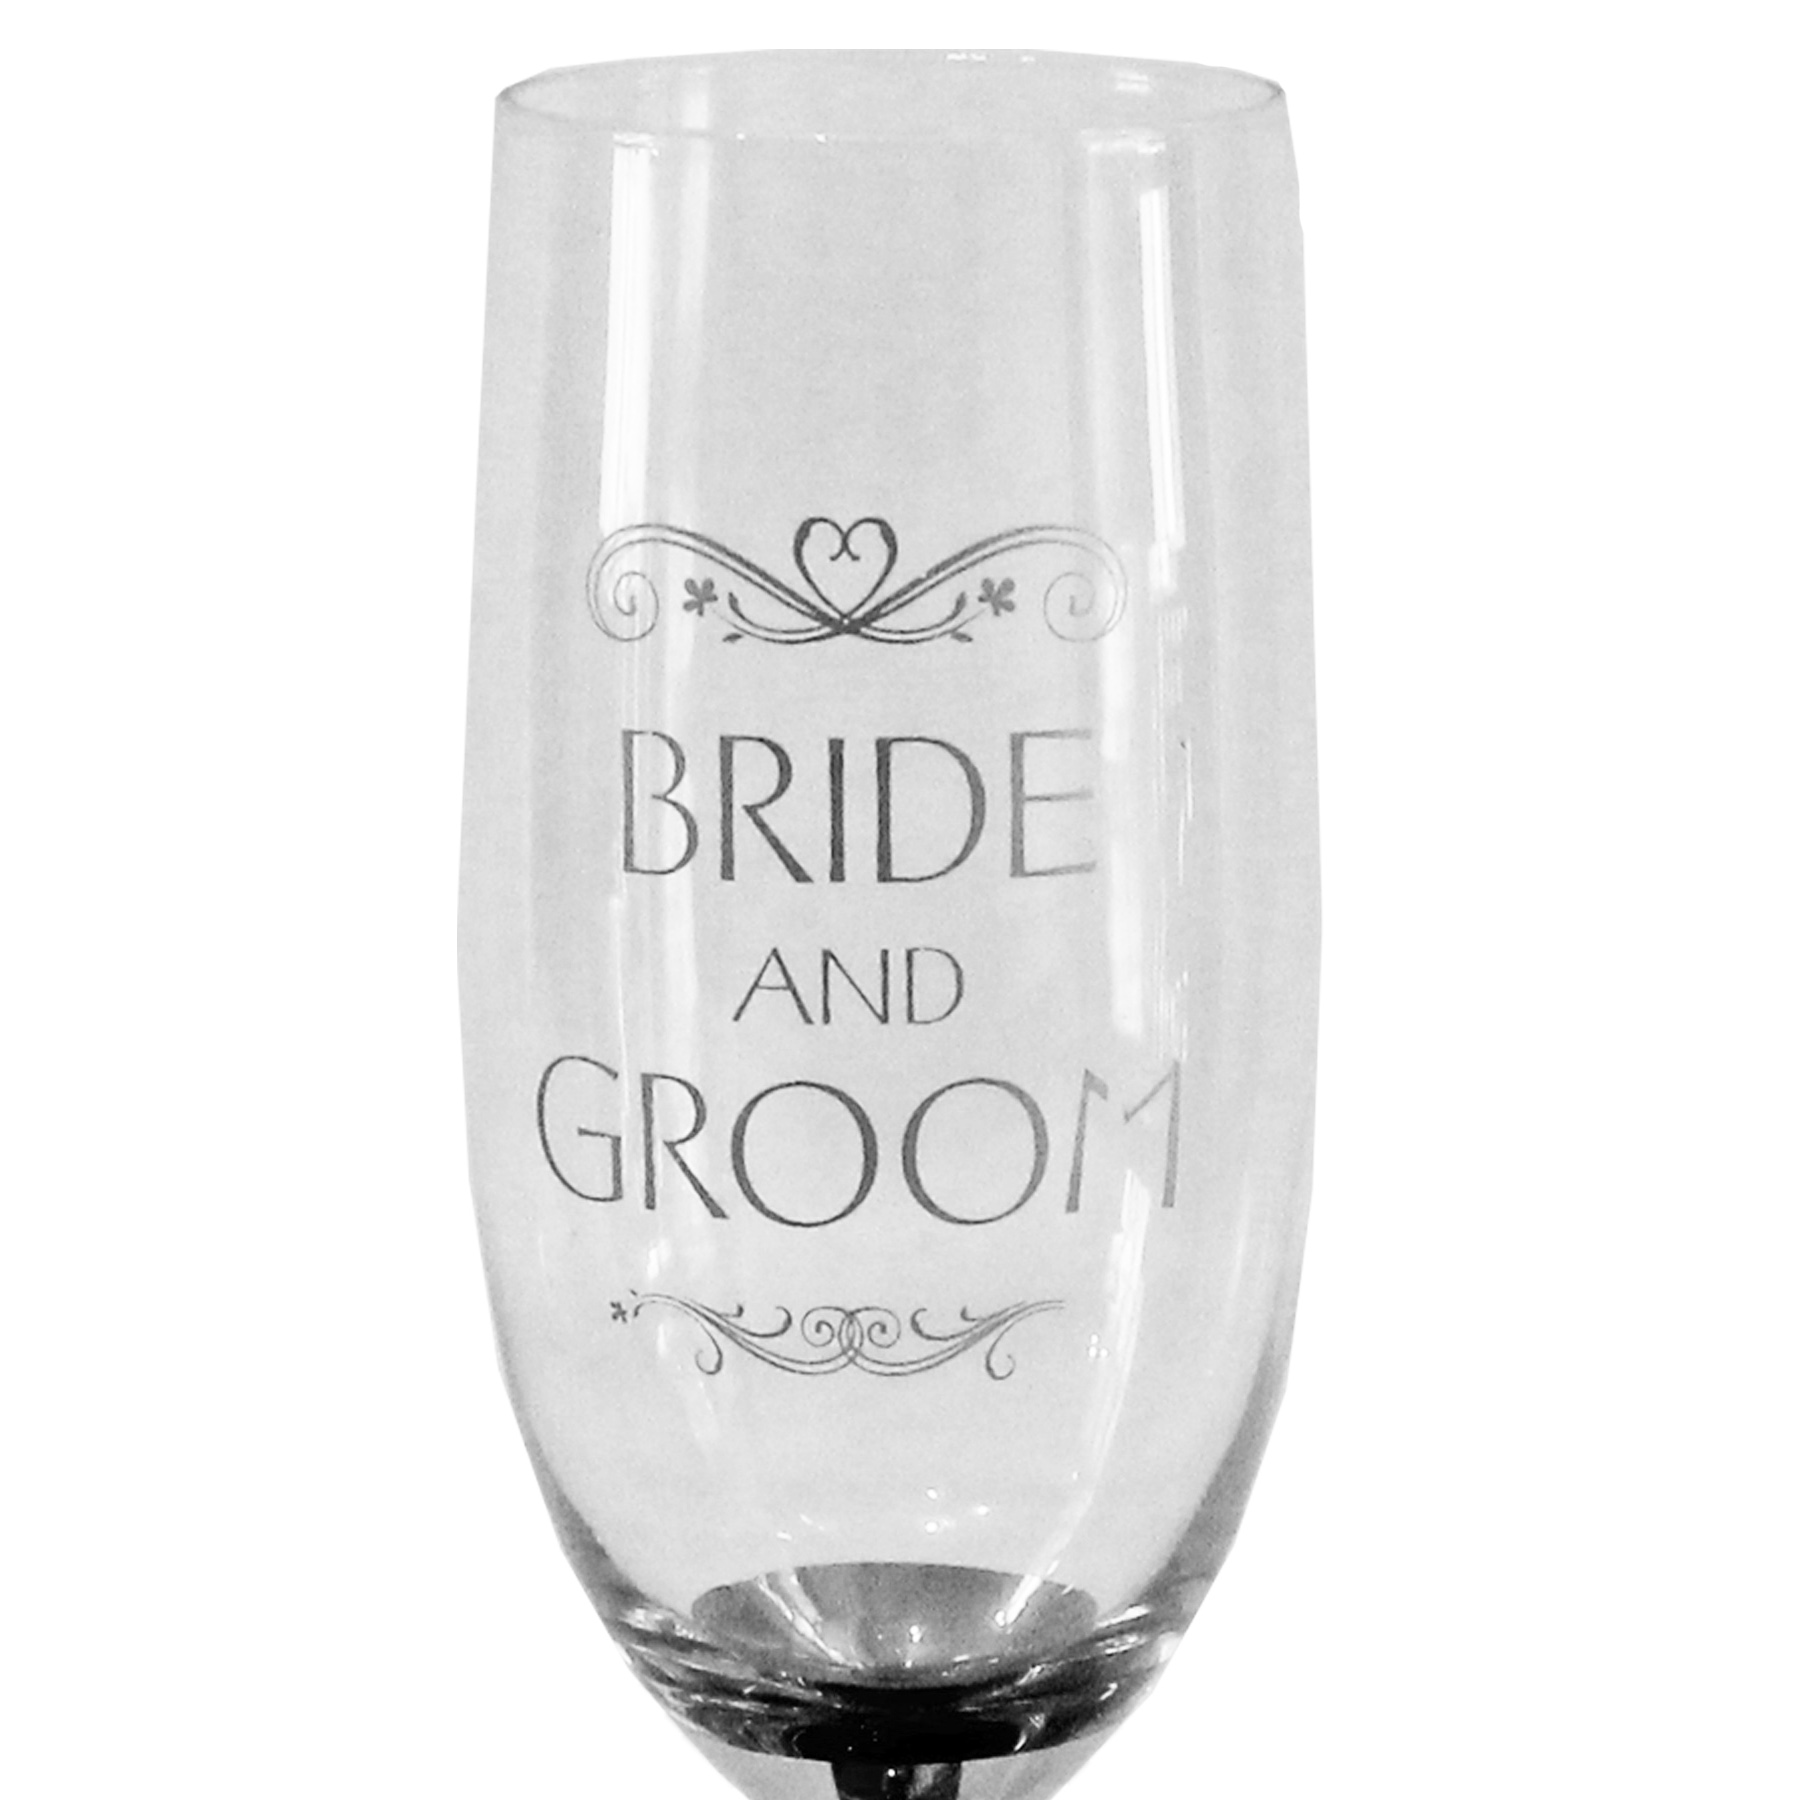 Wedding Day Champagne flute with silver stem - Bride and Groom